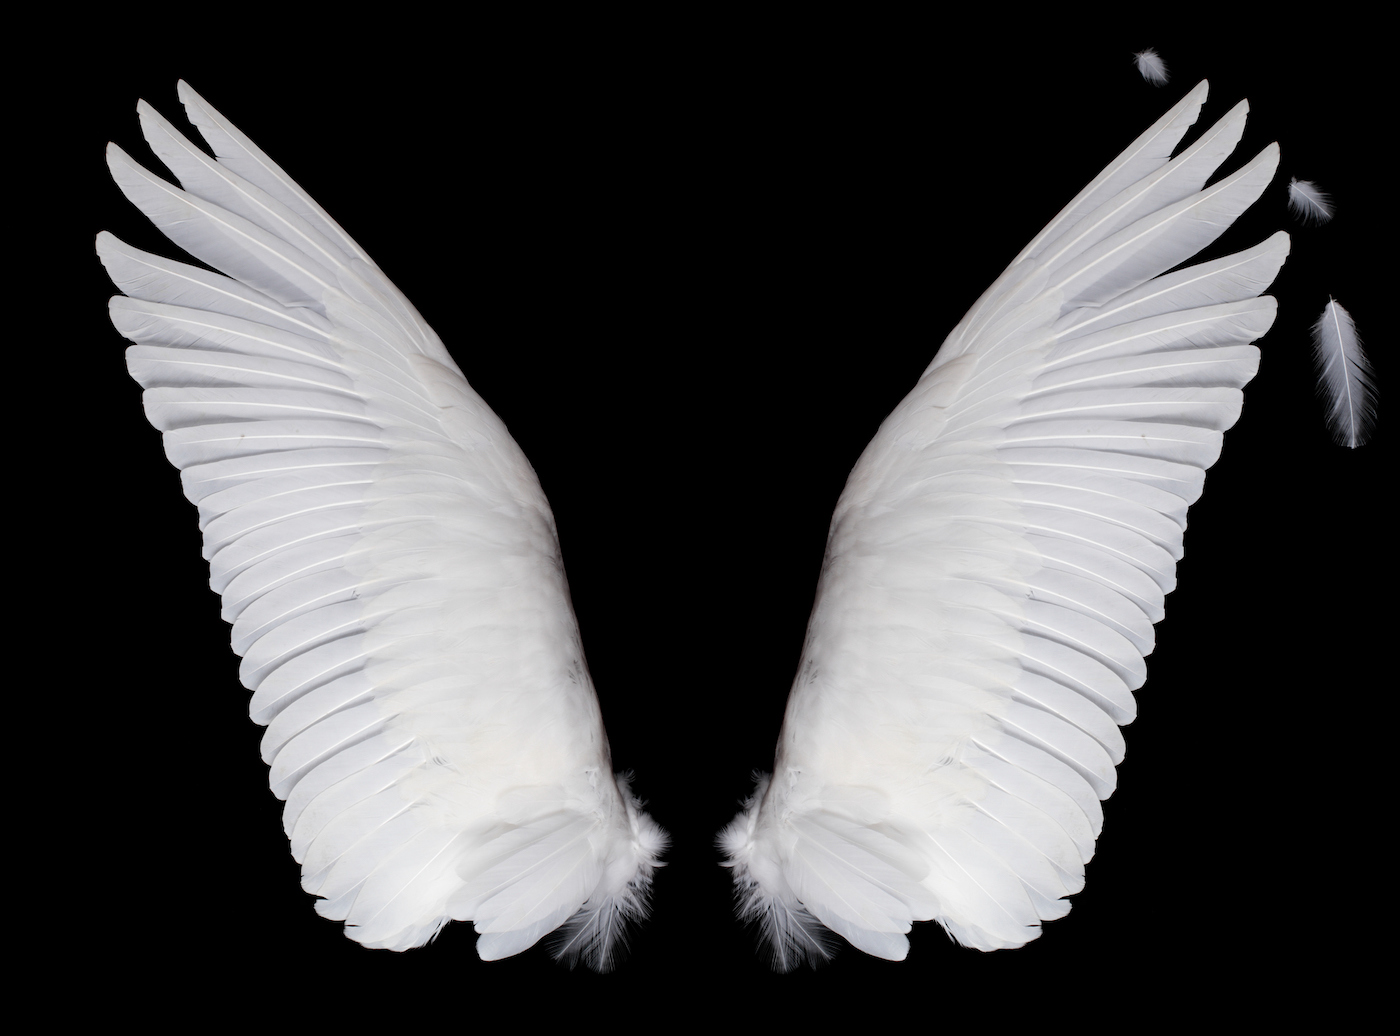 White wings are distinguished on a black background